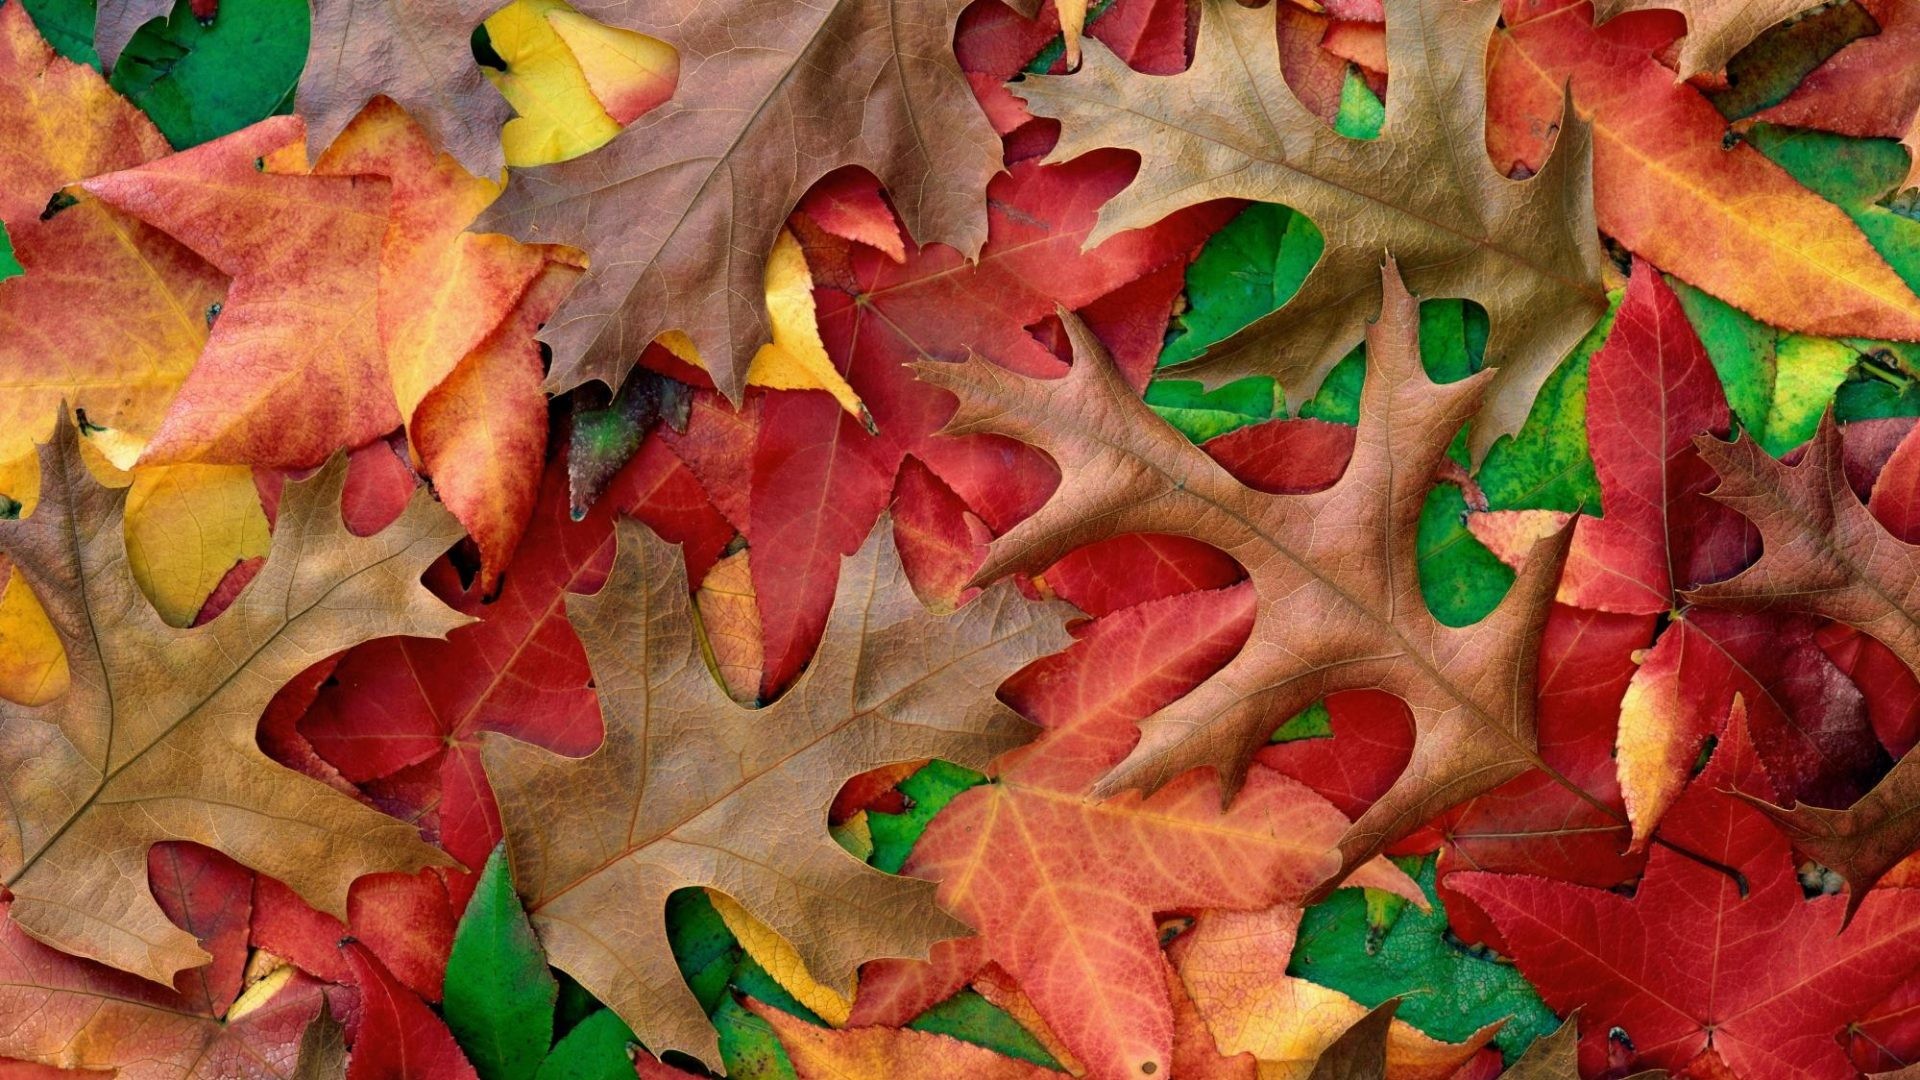 1920x1080 October Tag - Leaves Autumn Photography Nature Shades Fall Season October  Free Desktop Background for HD